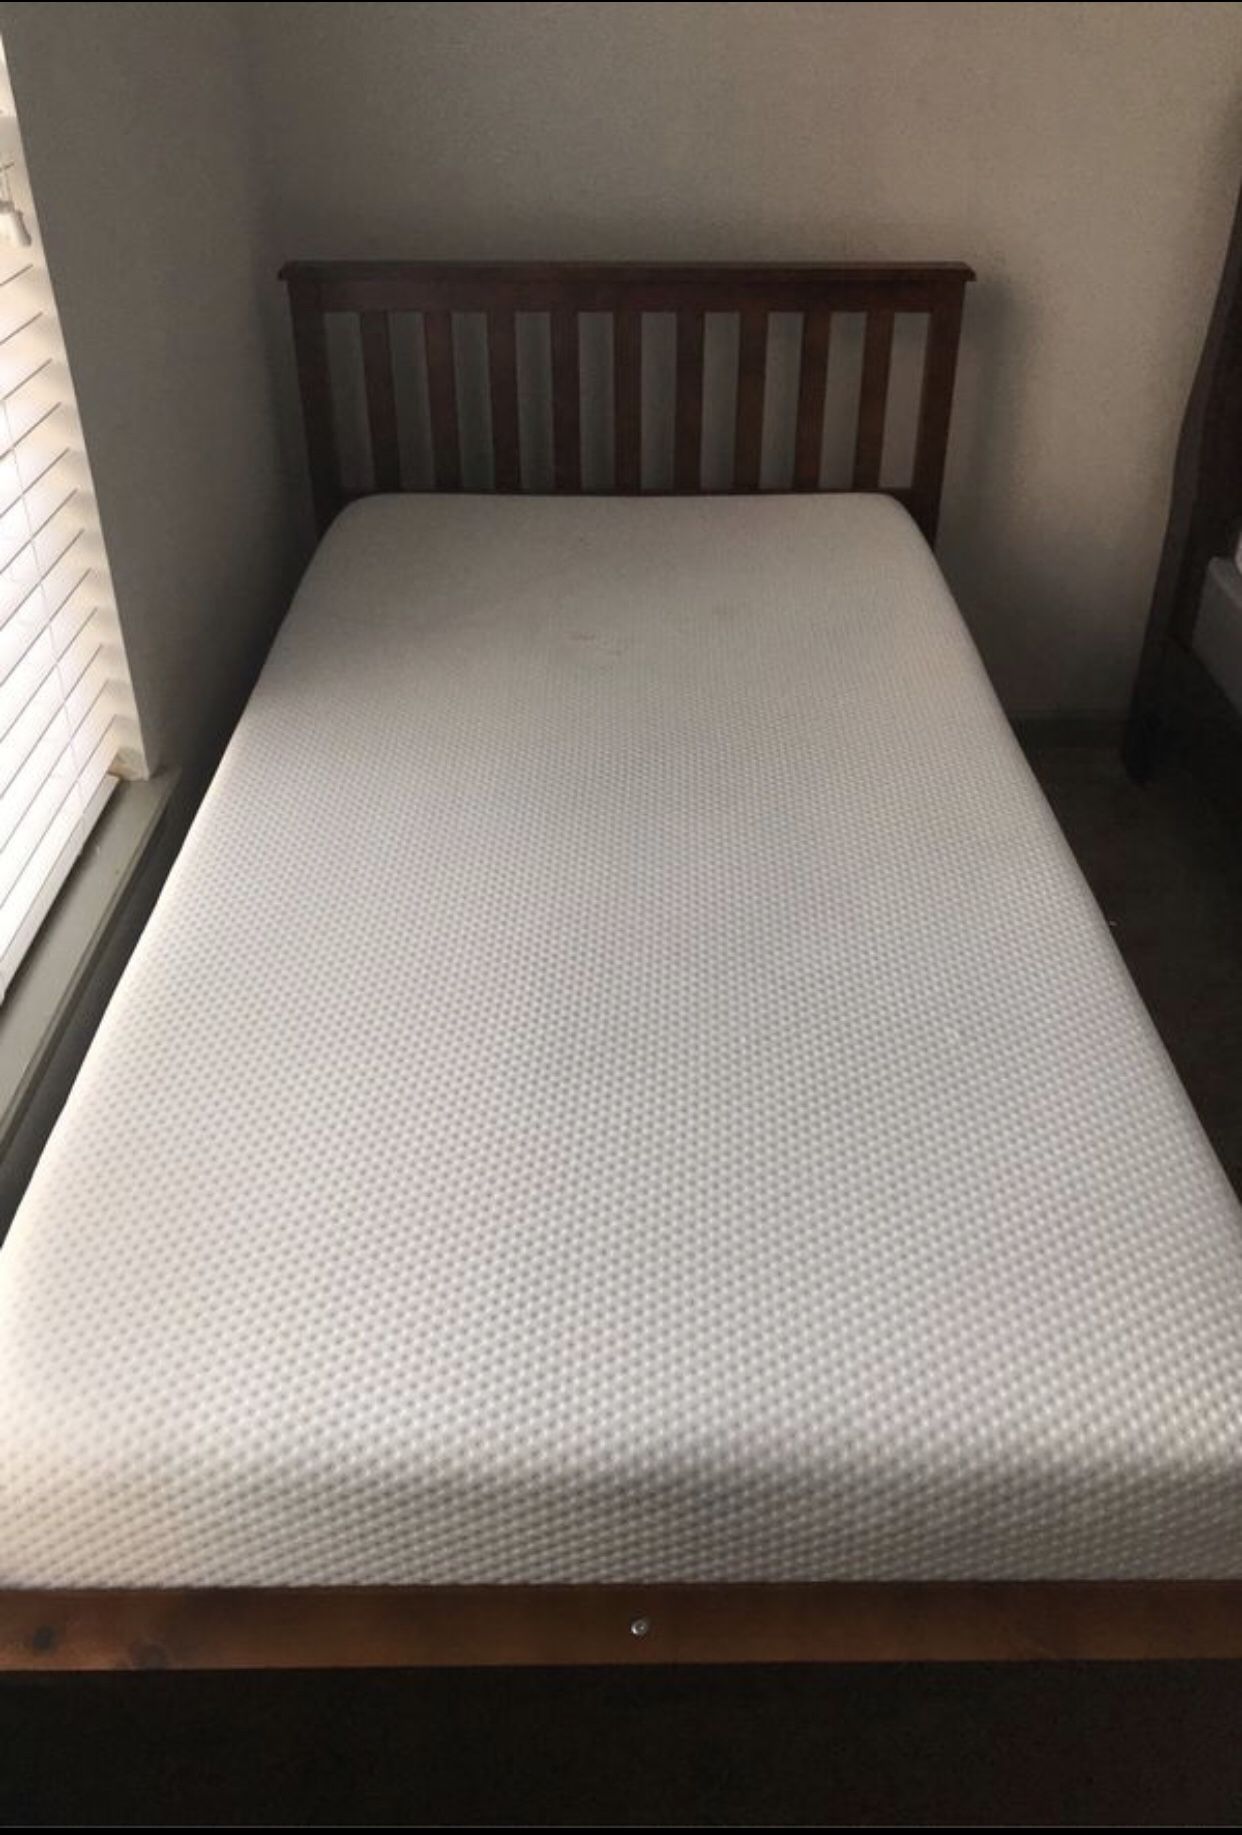 Twin size bed frame with memory foam mattress